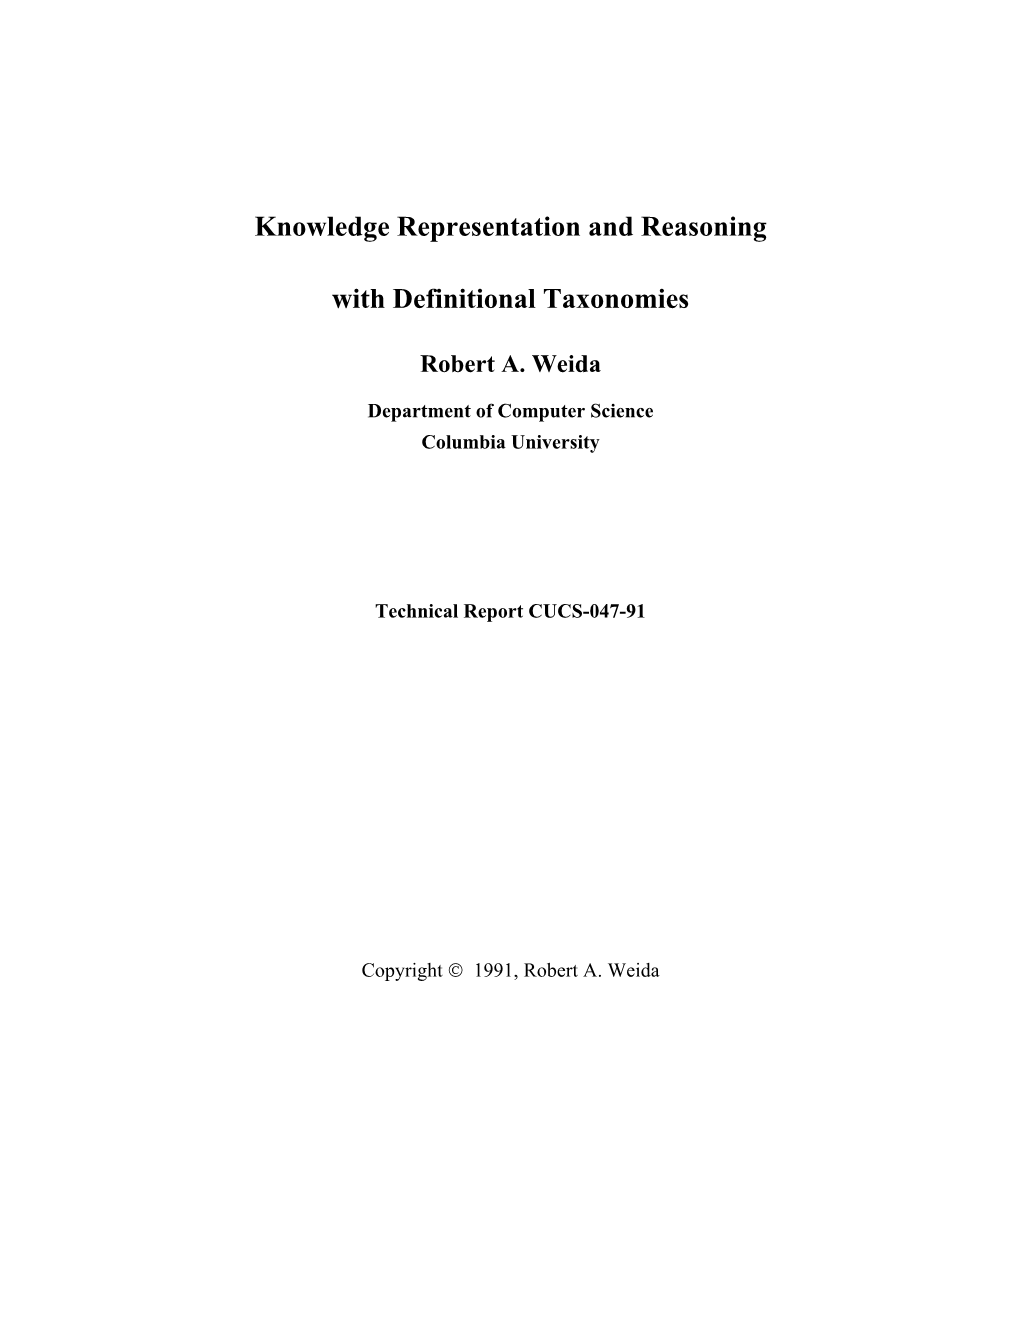 Knowledge Representation and Reasoning with Definitional